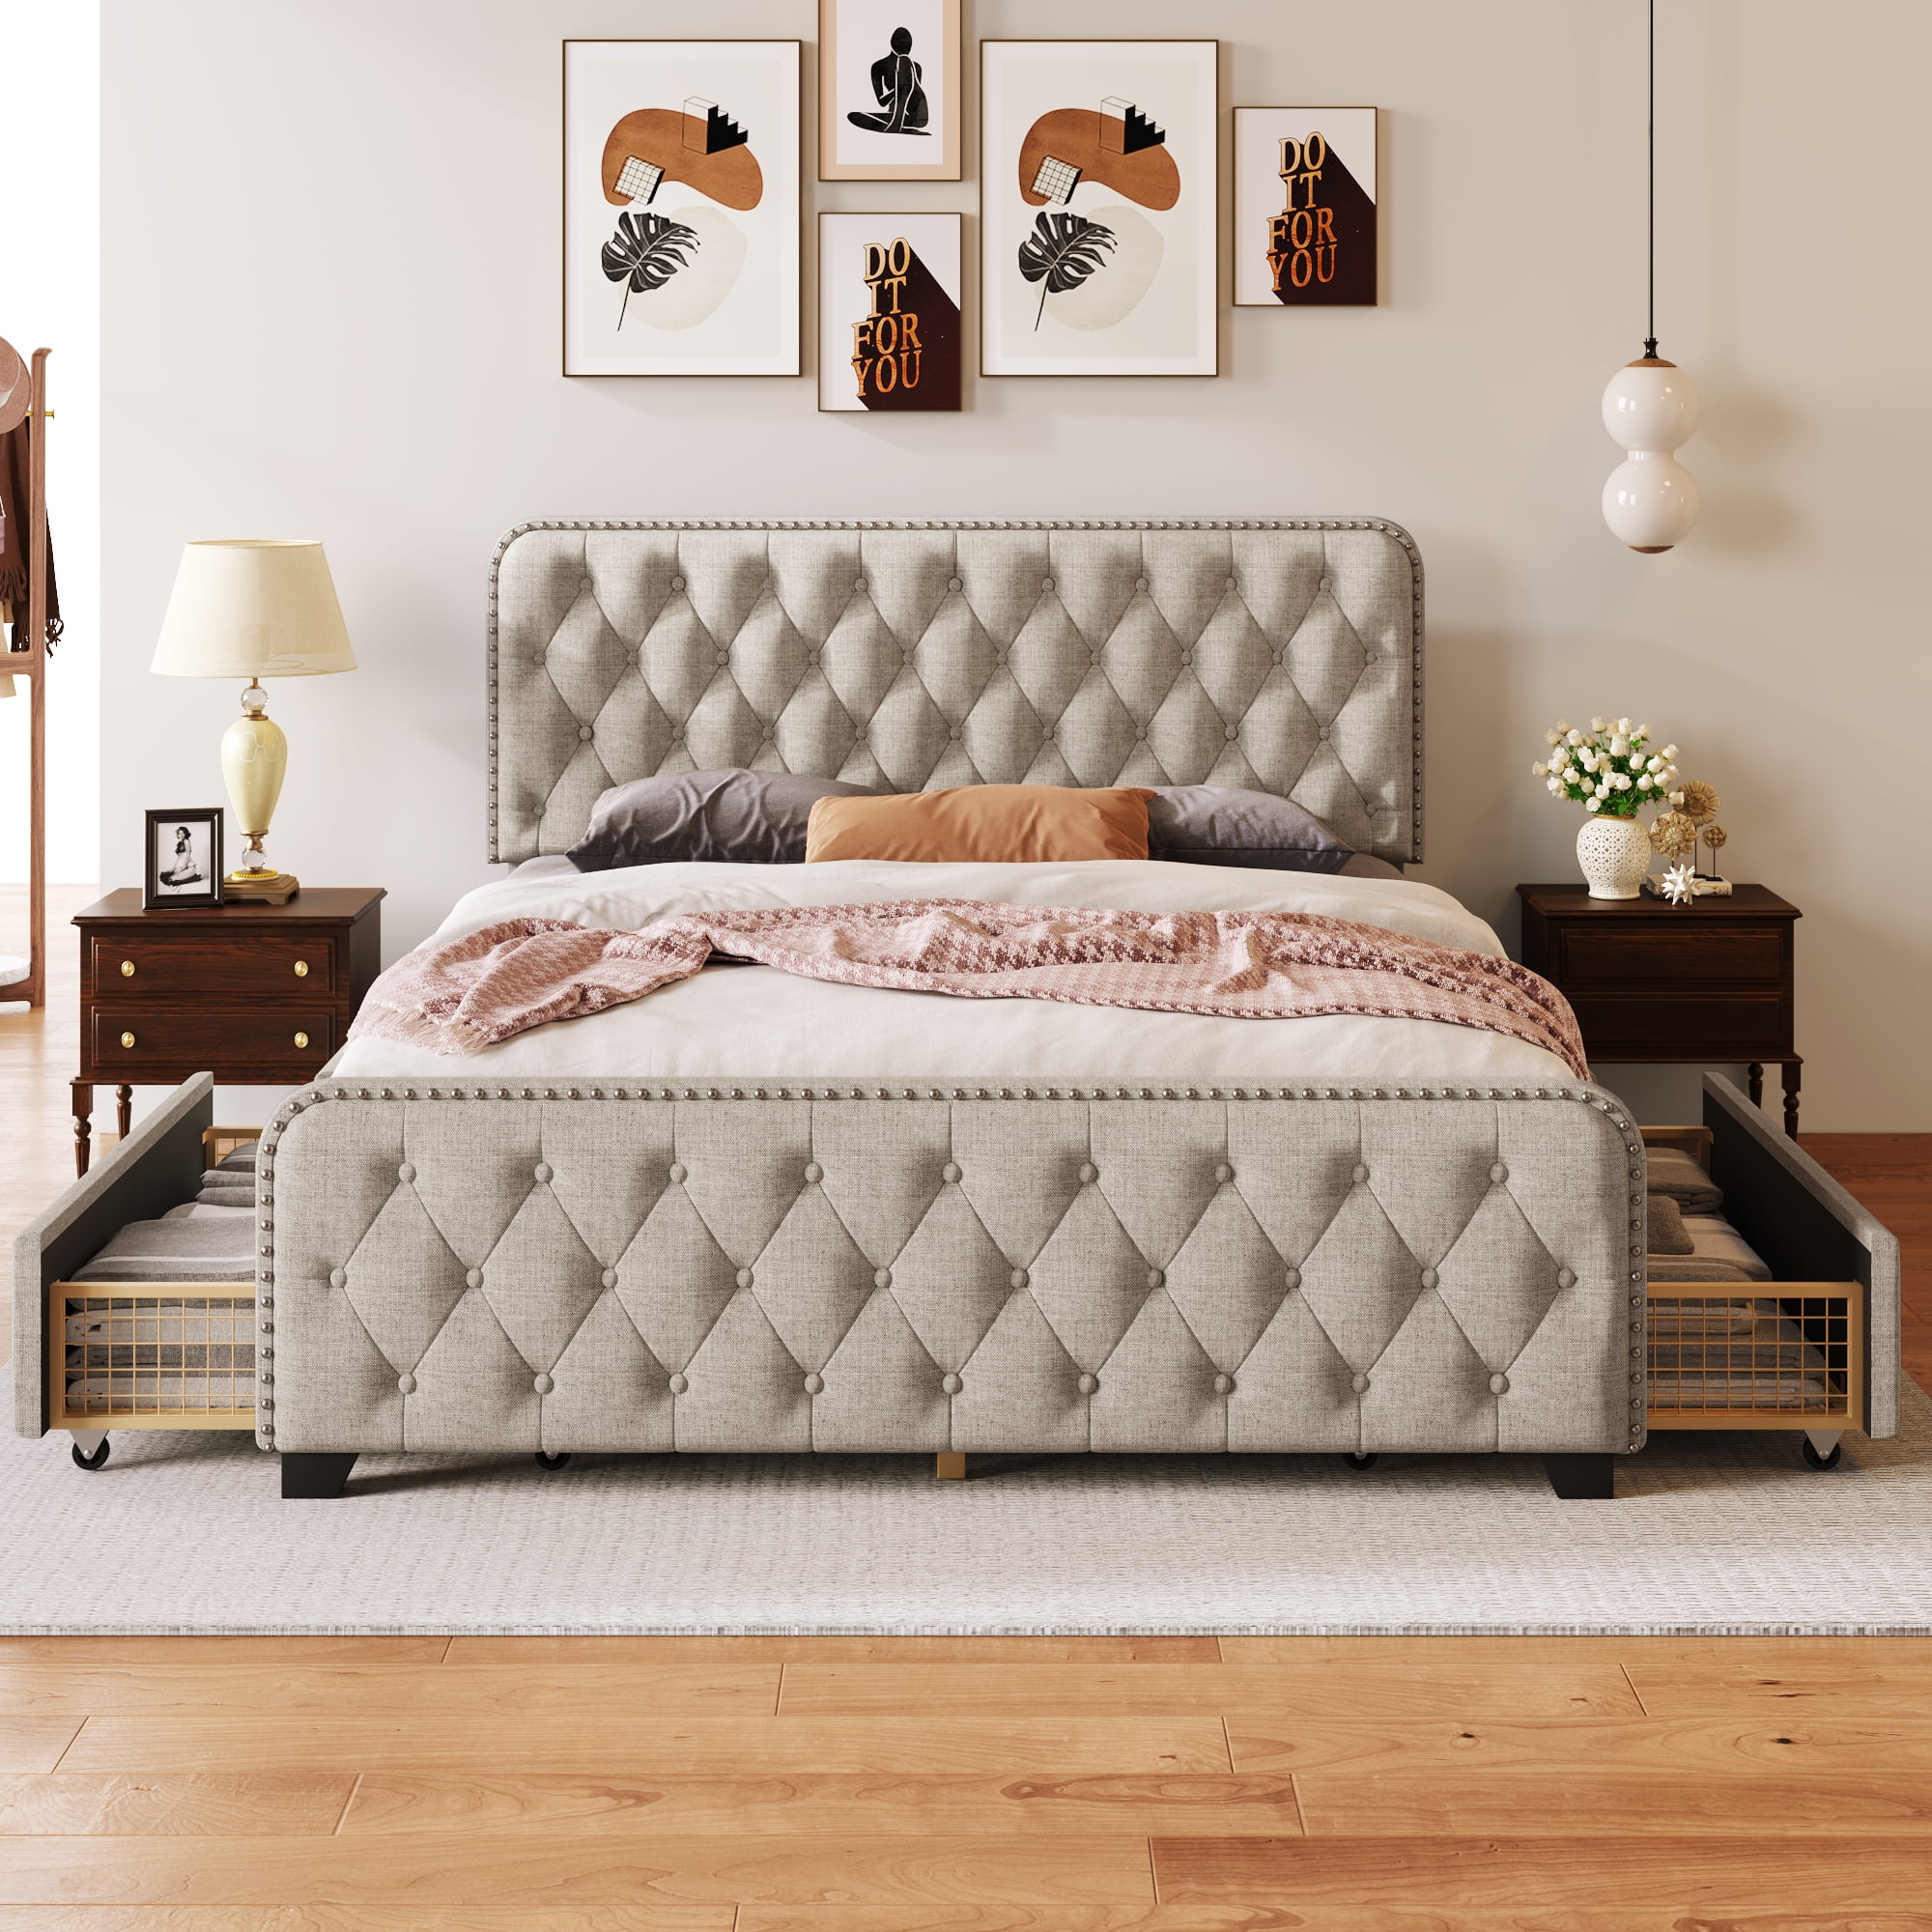 uhomepro Storage Upholstered Platform Bed Queen Size with Nail Trim ...